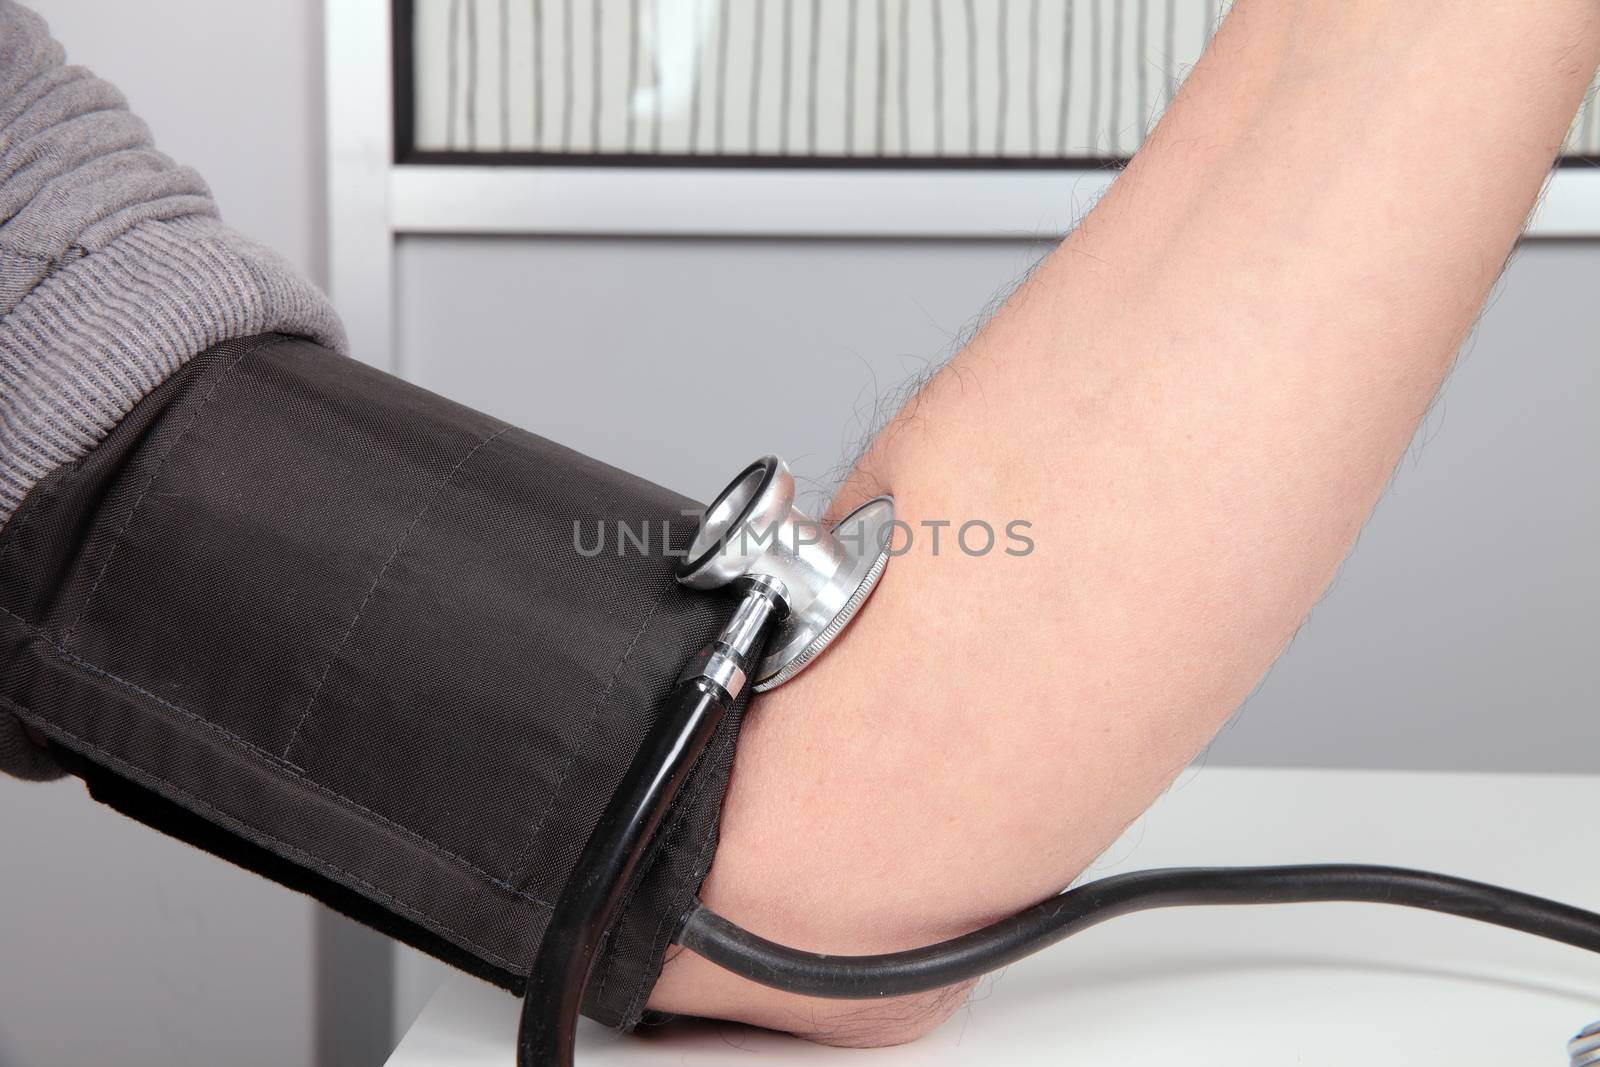 measures the blood pressure of a man